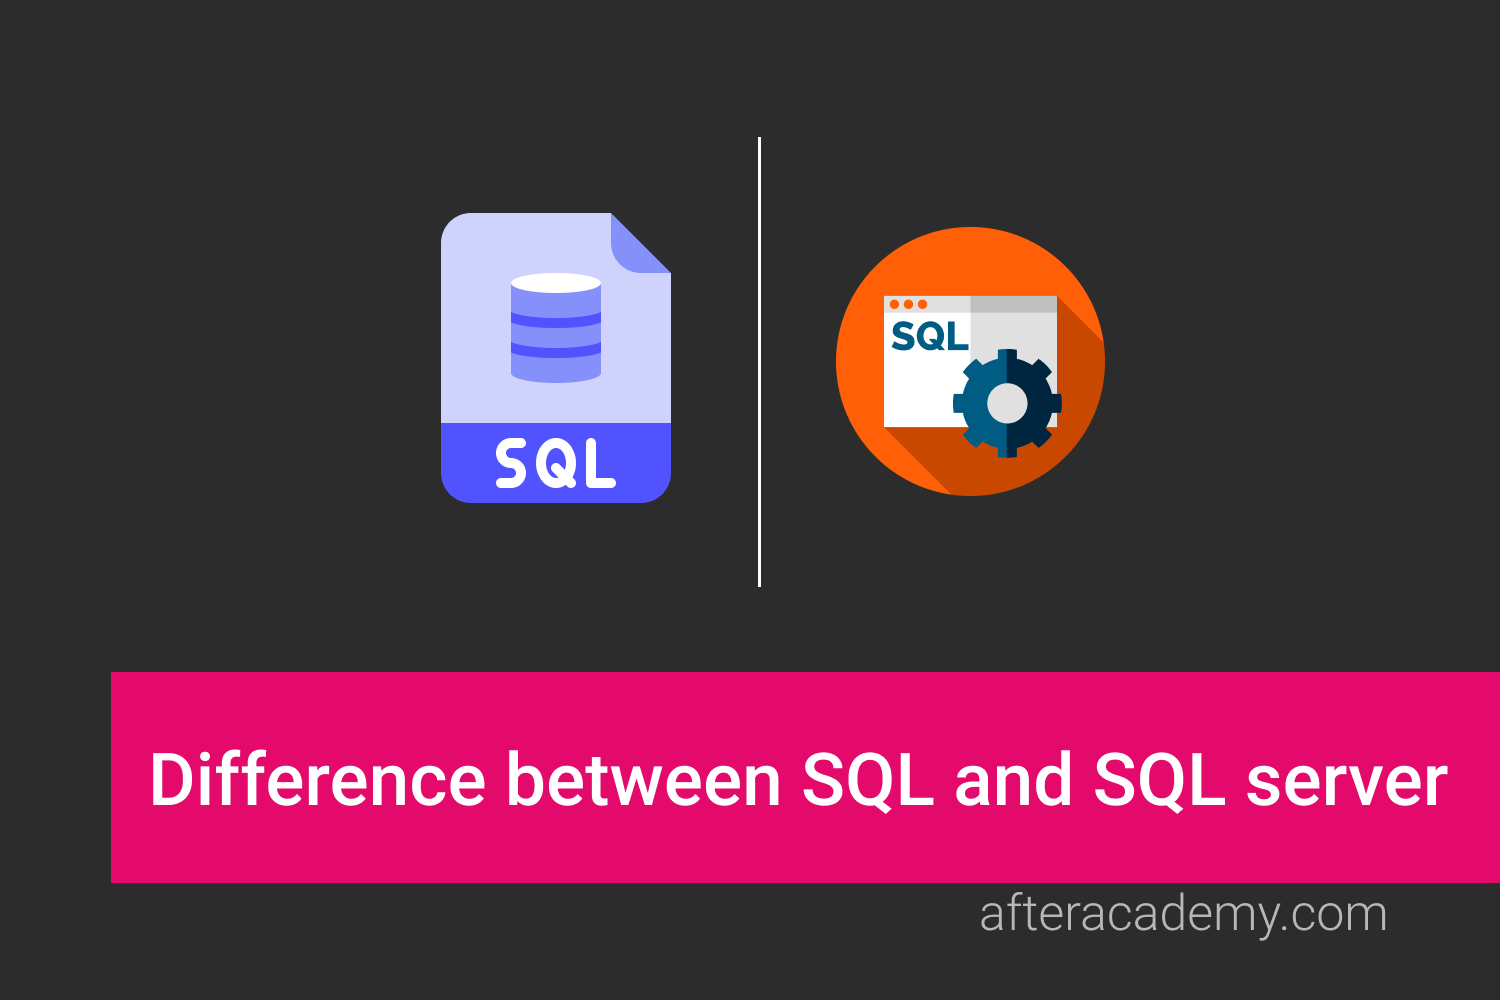 What is the difference between SQL and SQL server?